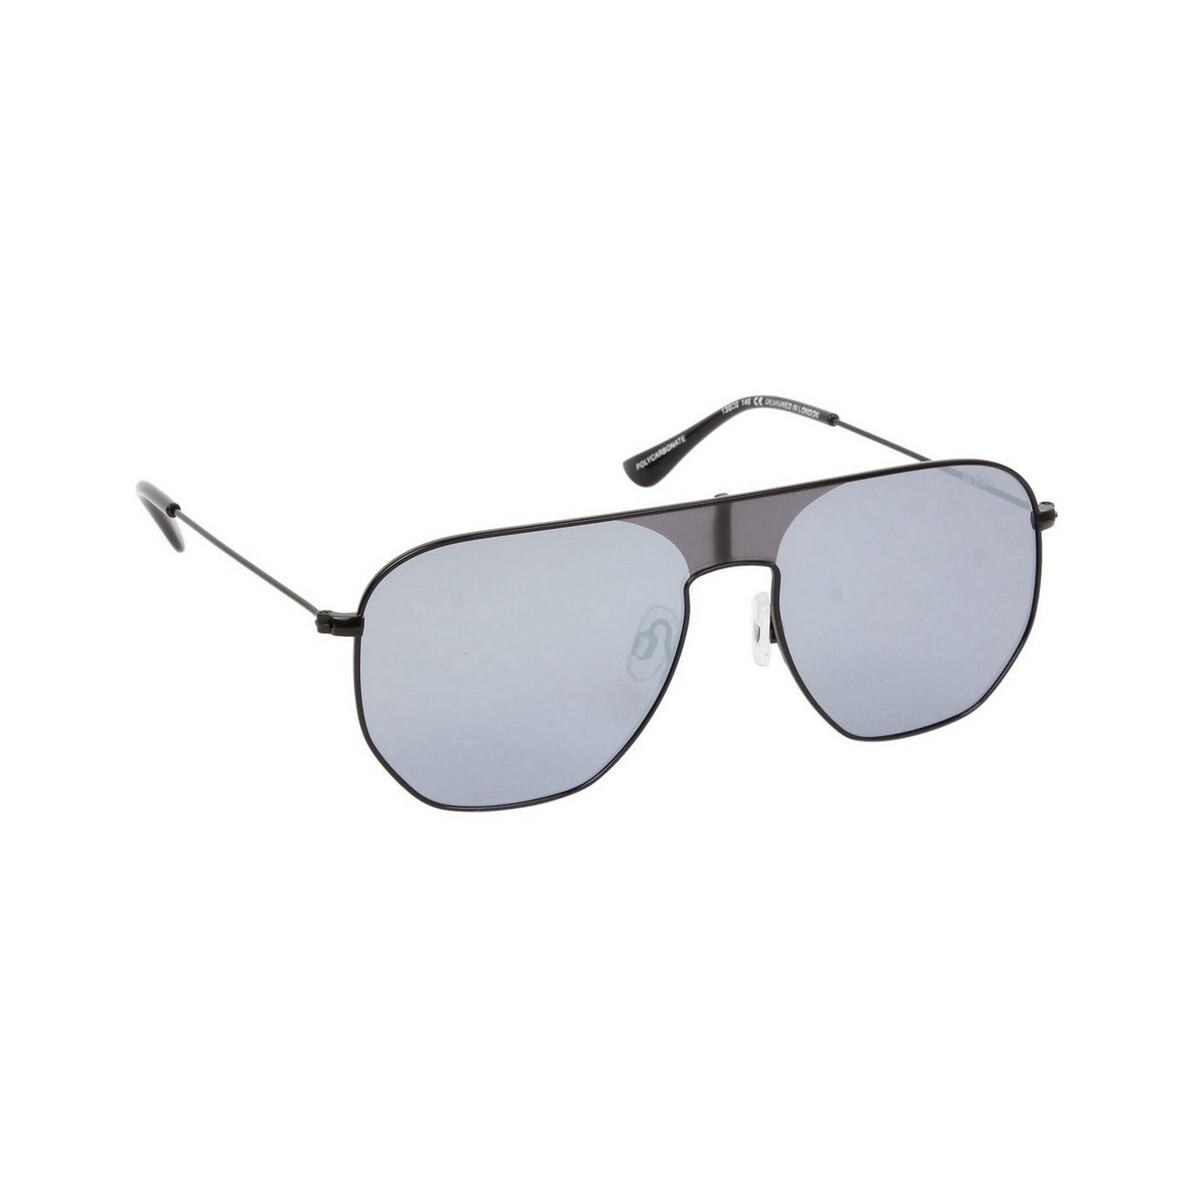 Lee Cooper Male Black Frame With Silver Lens Sunglass